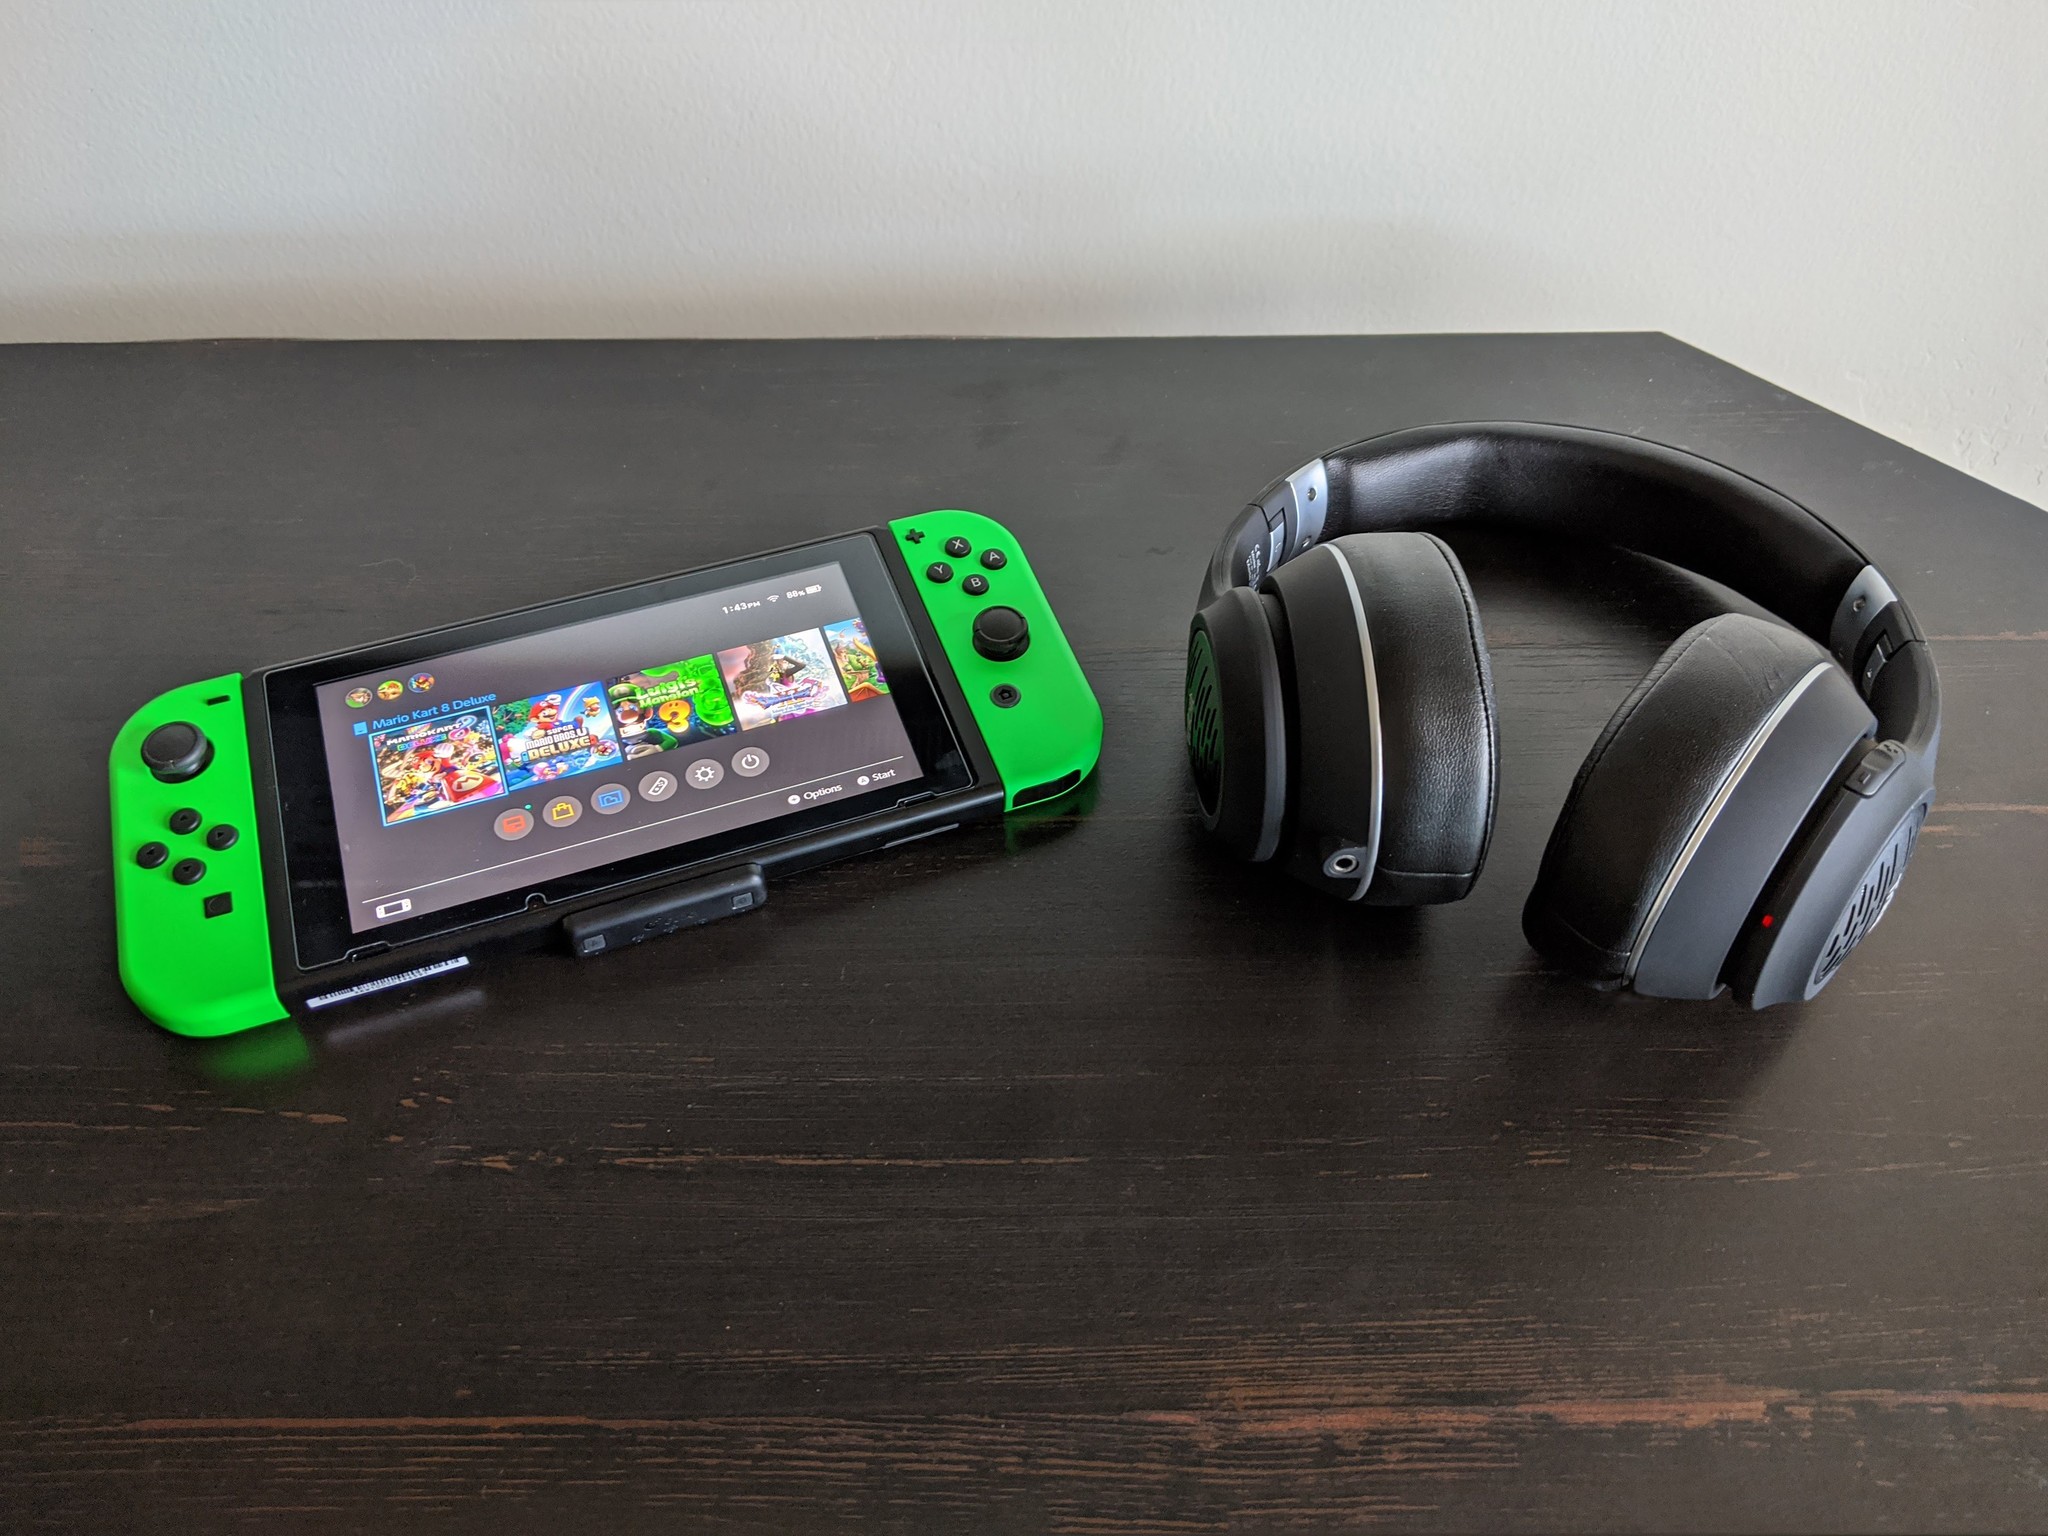 How to use Bluetooth headphones with a Nintendo Switch via the USB-C port: place the headphones and gulikit near each other until paired